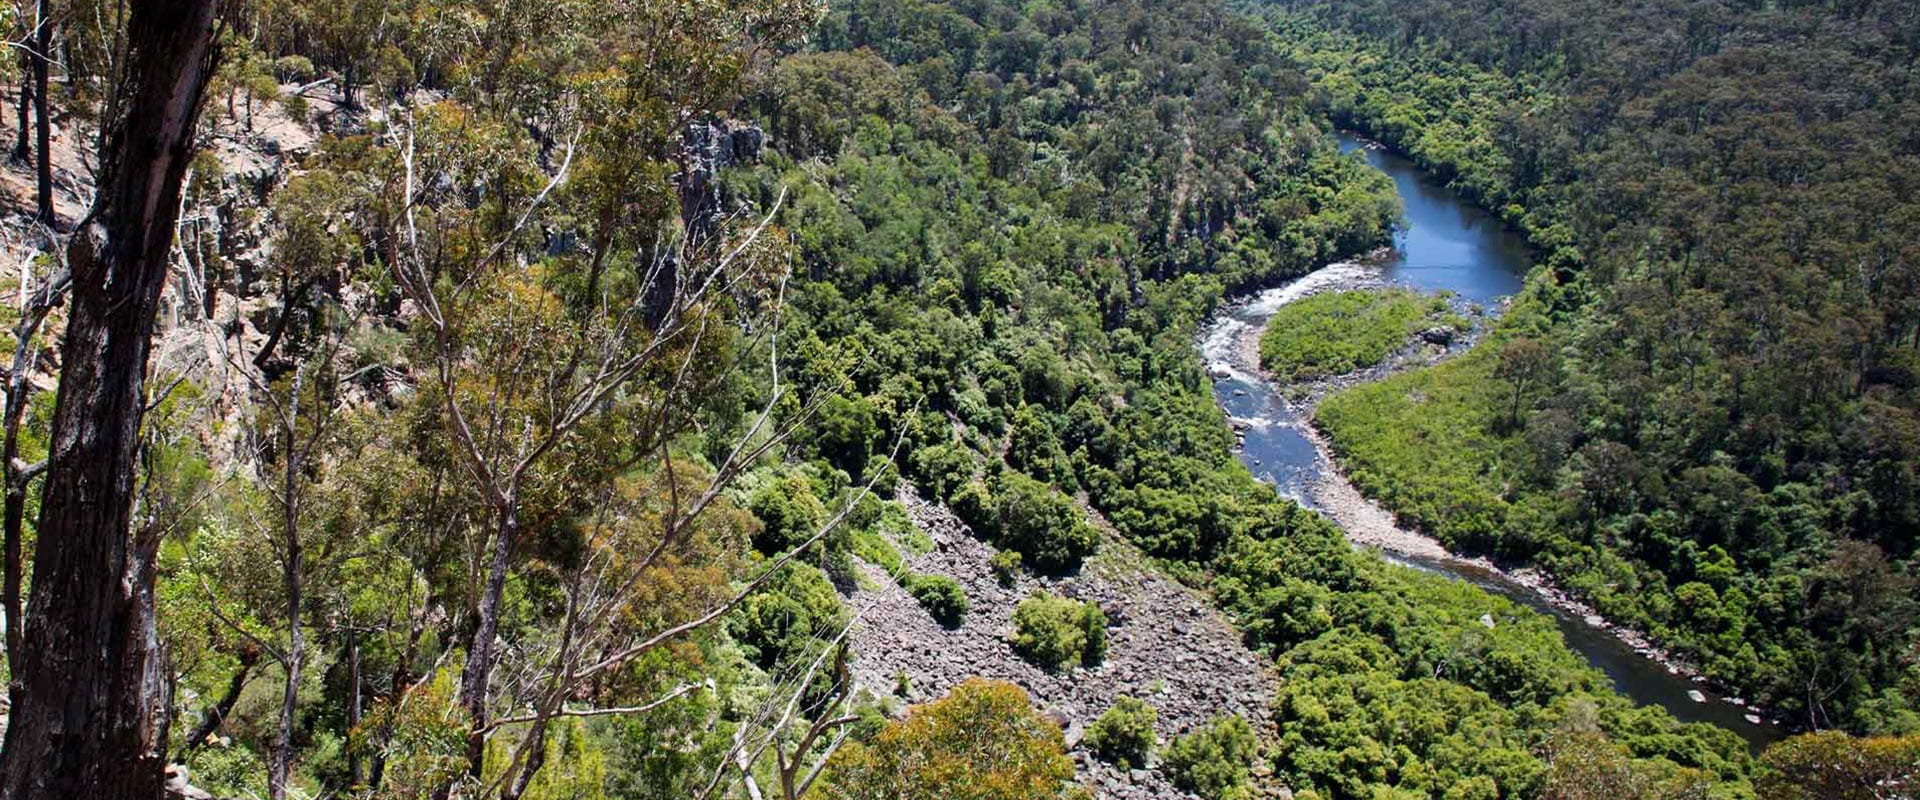 A spectacular view looking down over a long winding river surrounded by hills in dense rugged bushland